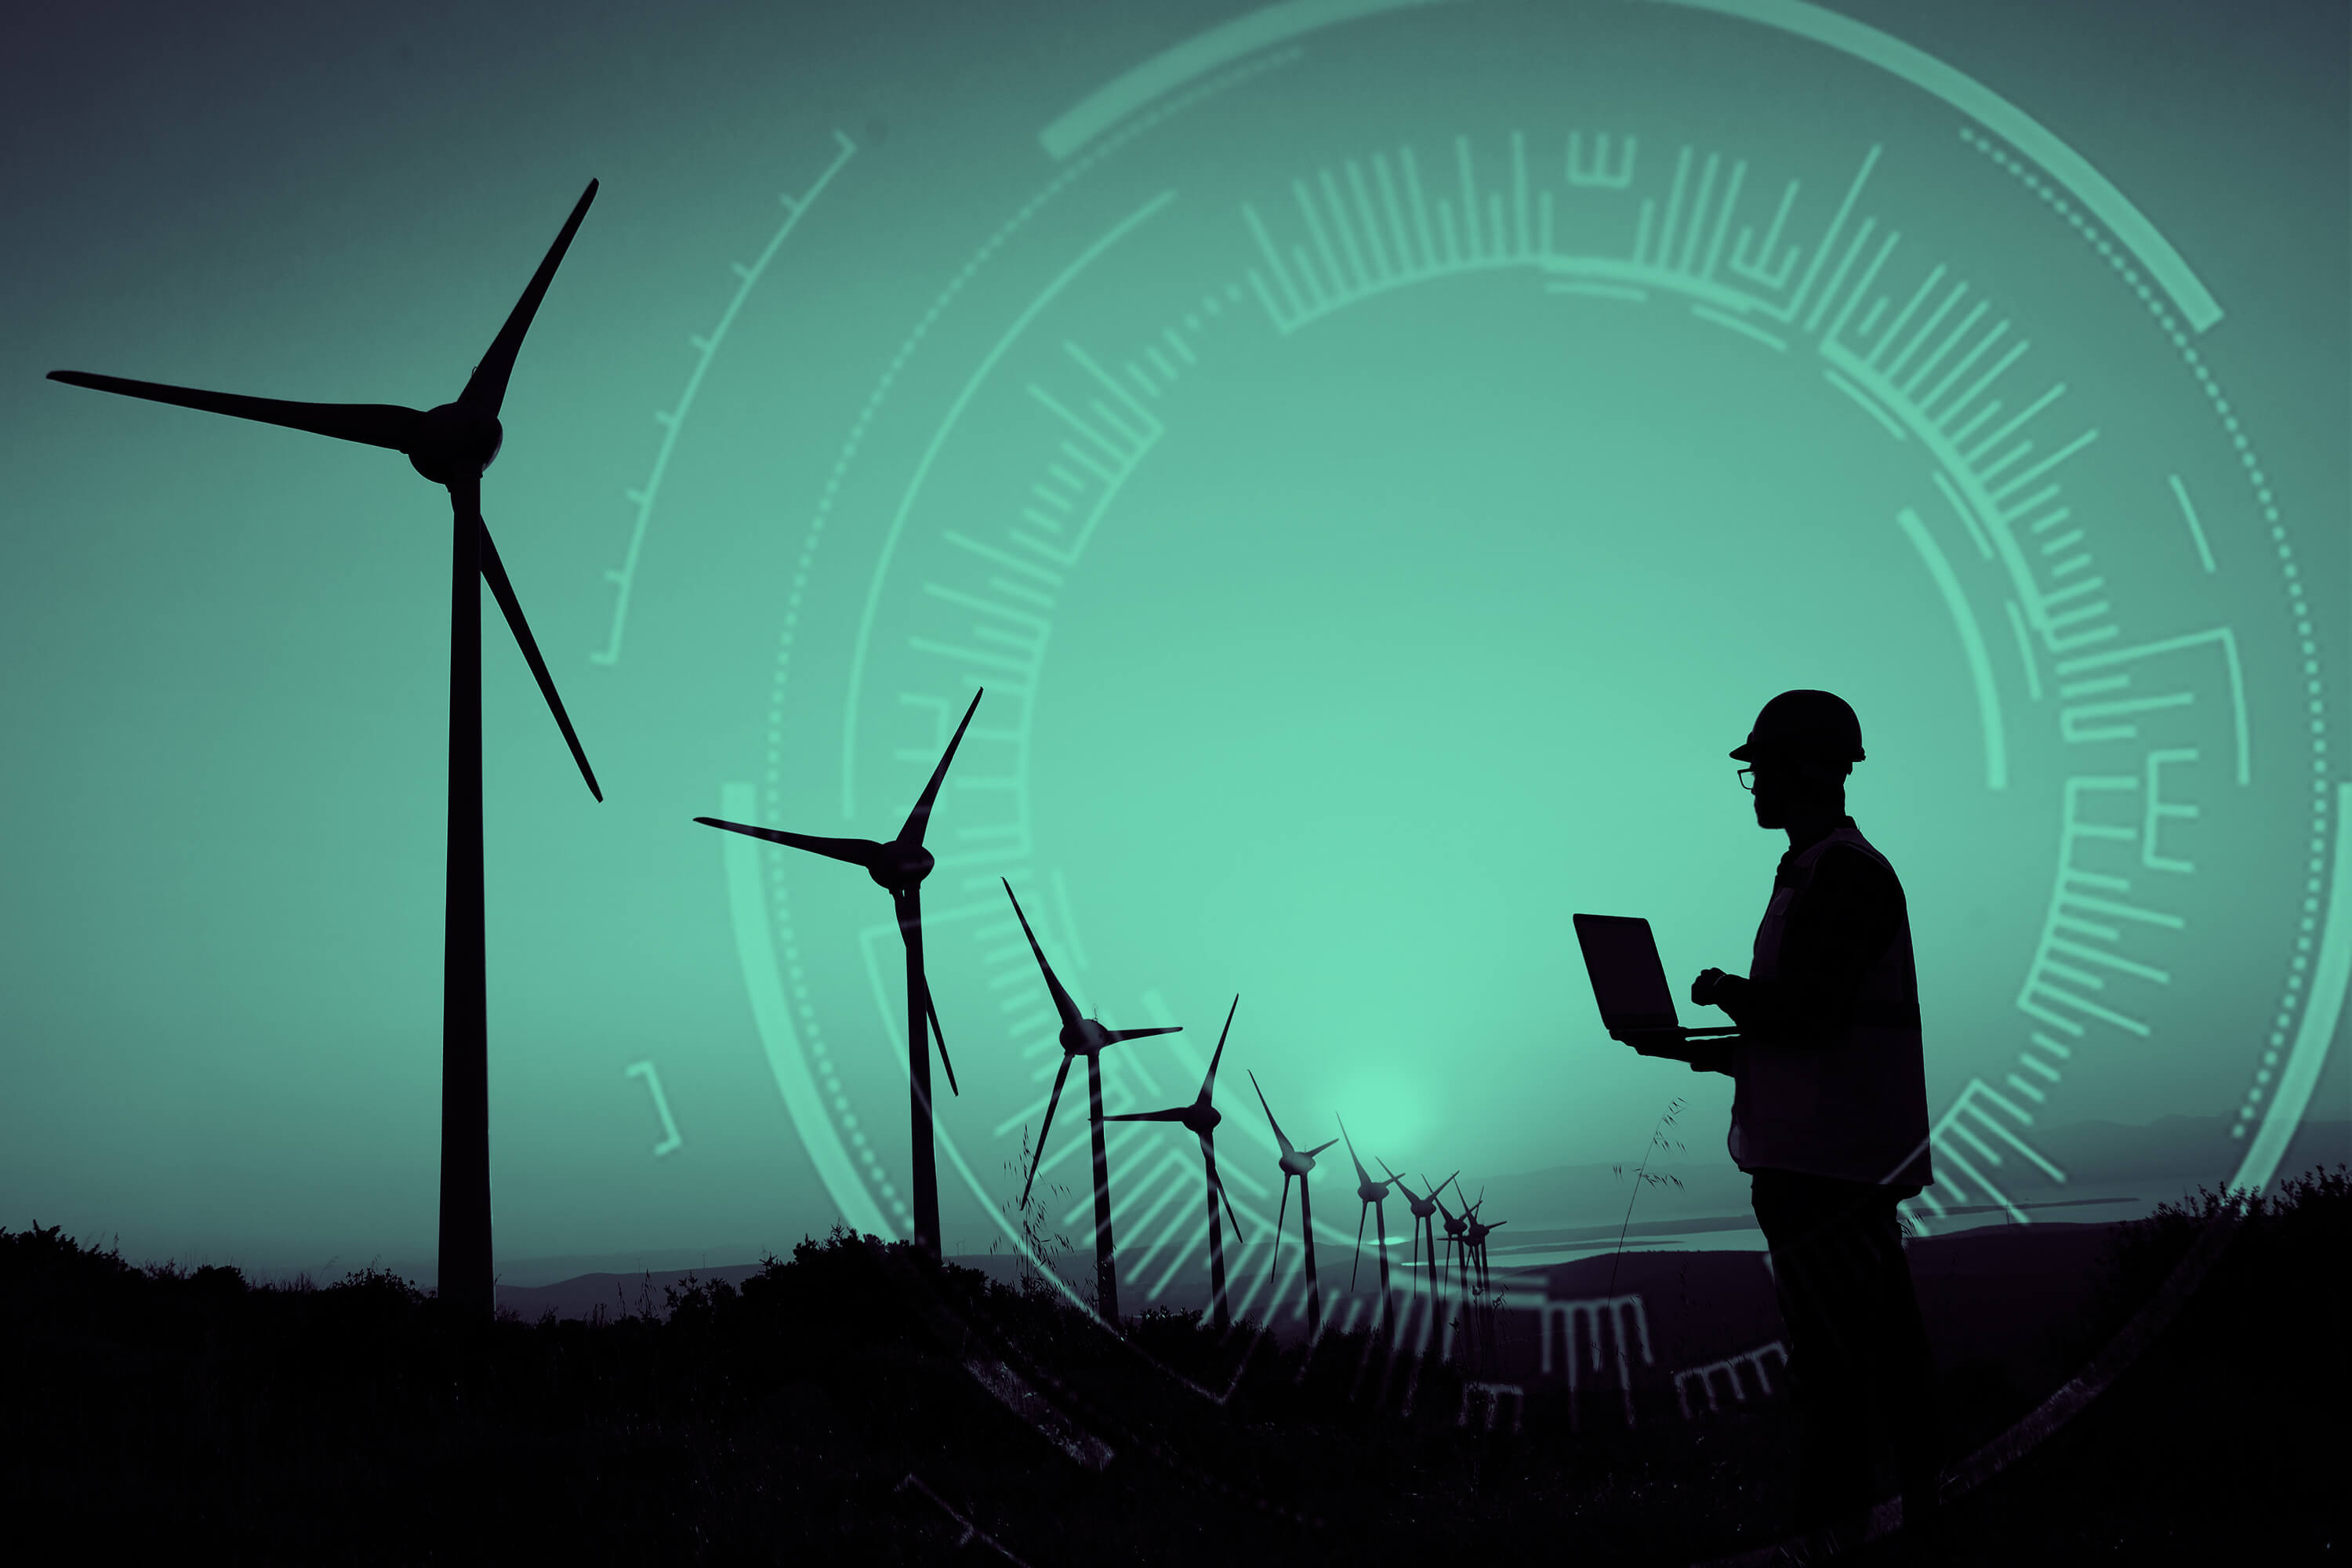 Wind developers can increase wind-farm operational productivity by quickly noting and addressing underperforming turbines. AI-based software with predictive models can help prevent component failures before they occur, saving unnecessary asset downtime and lost revenue.